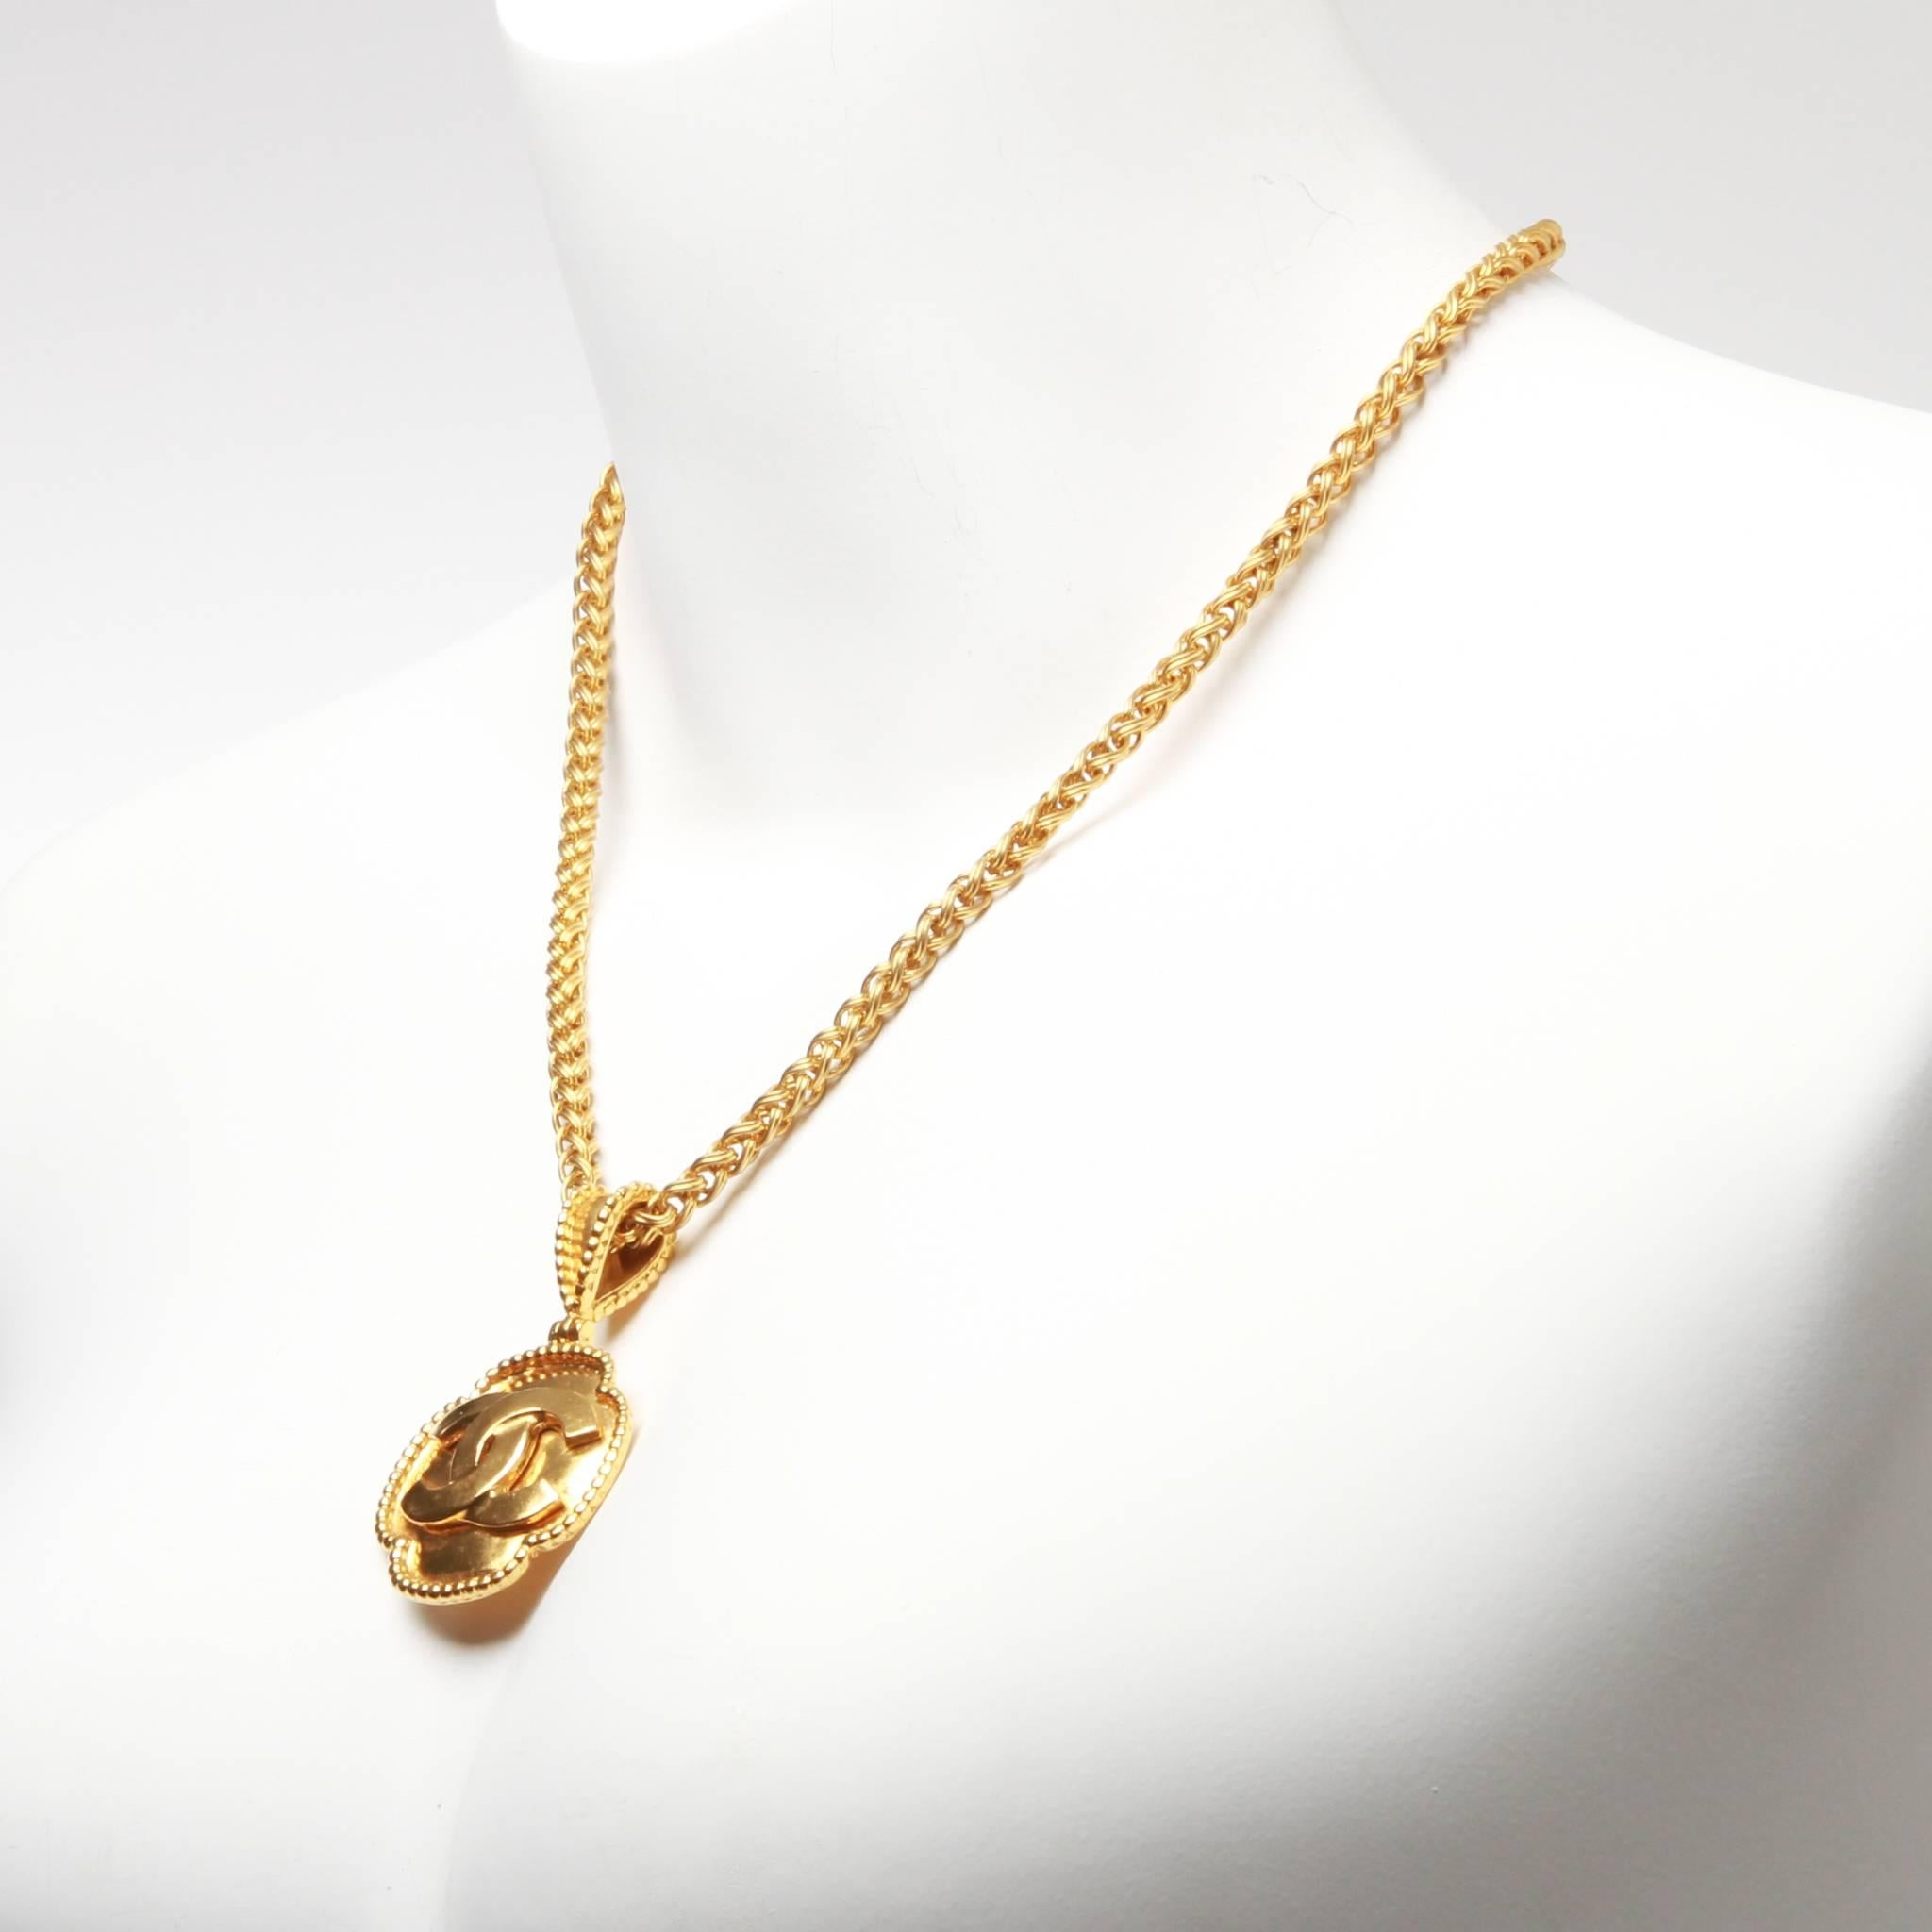 Chanel princess length gold-tone necklace featuring a CC clover shaped pendant. Feature hook closure at back with CC links.

Comes with box. Stamped 96 A.